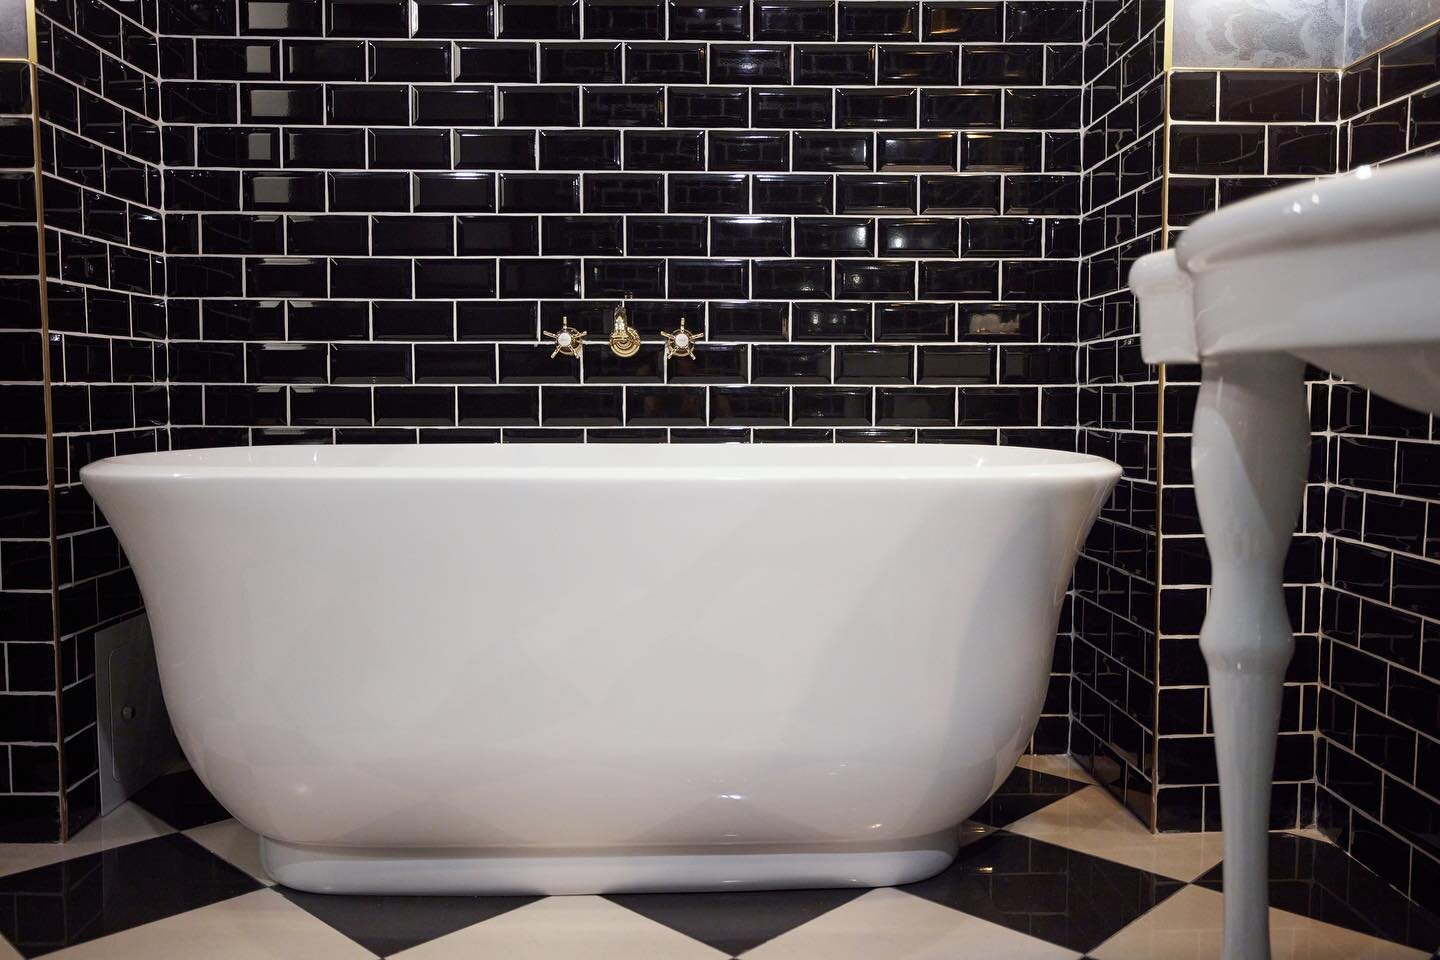 Retro vibes meet modern luxury in our Deluxe King Baths, featuring a stunning free-standing tub and checkerboard tiles. Who says you can&rsquo;t have the best of both worlds? ✨

#thedorchestercollingwood